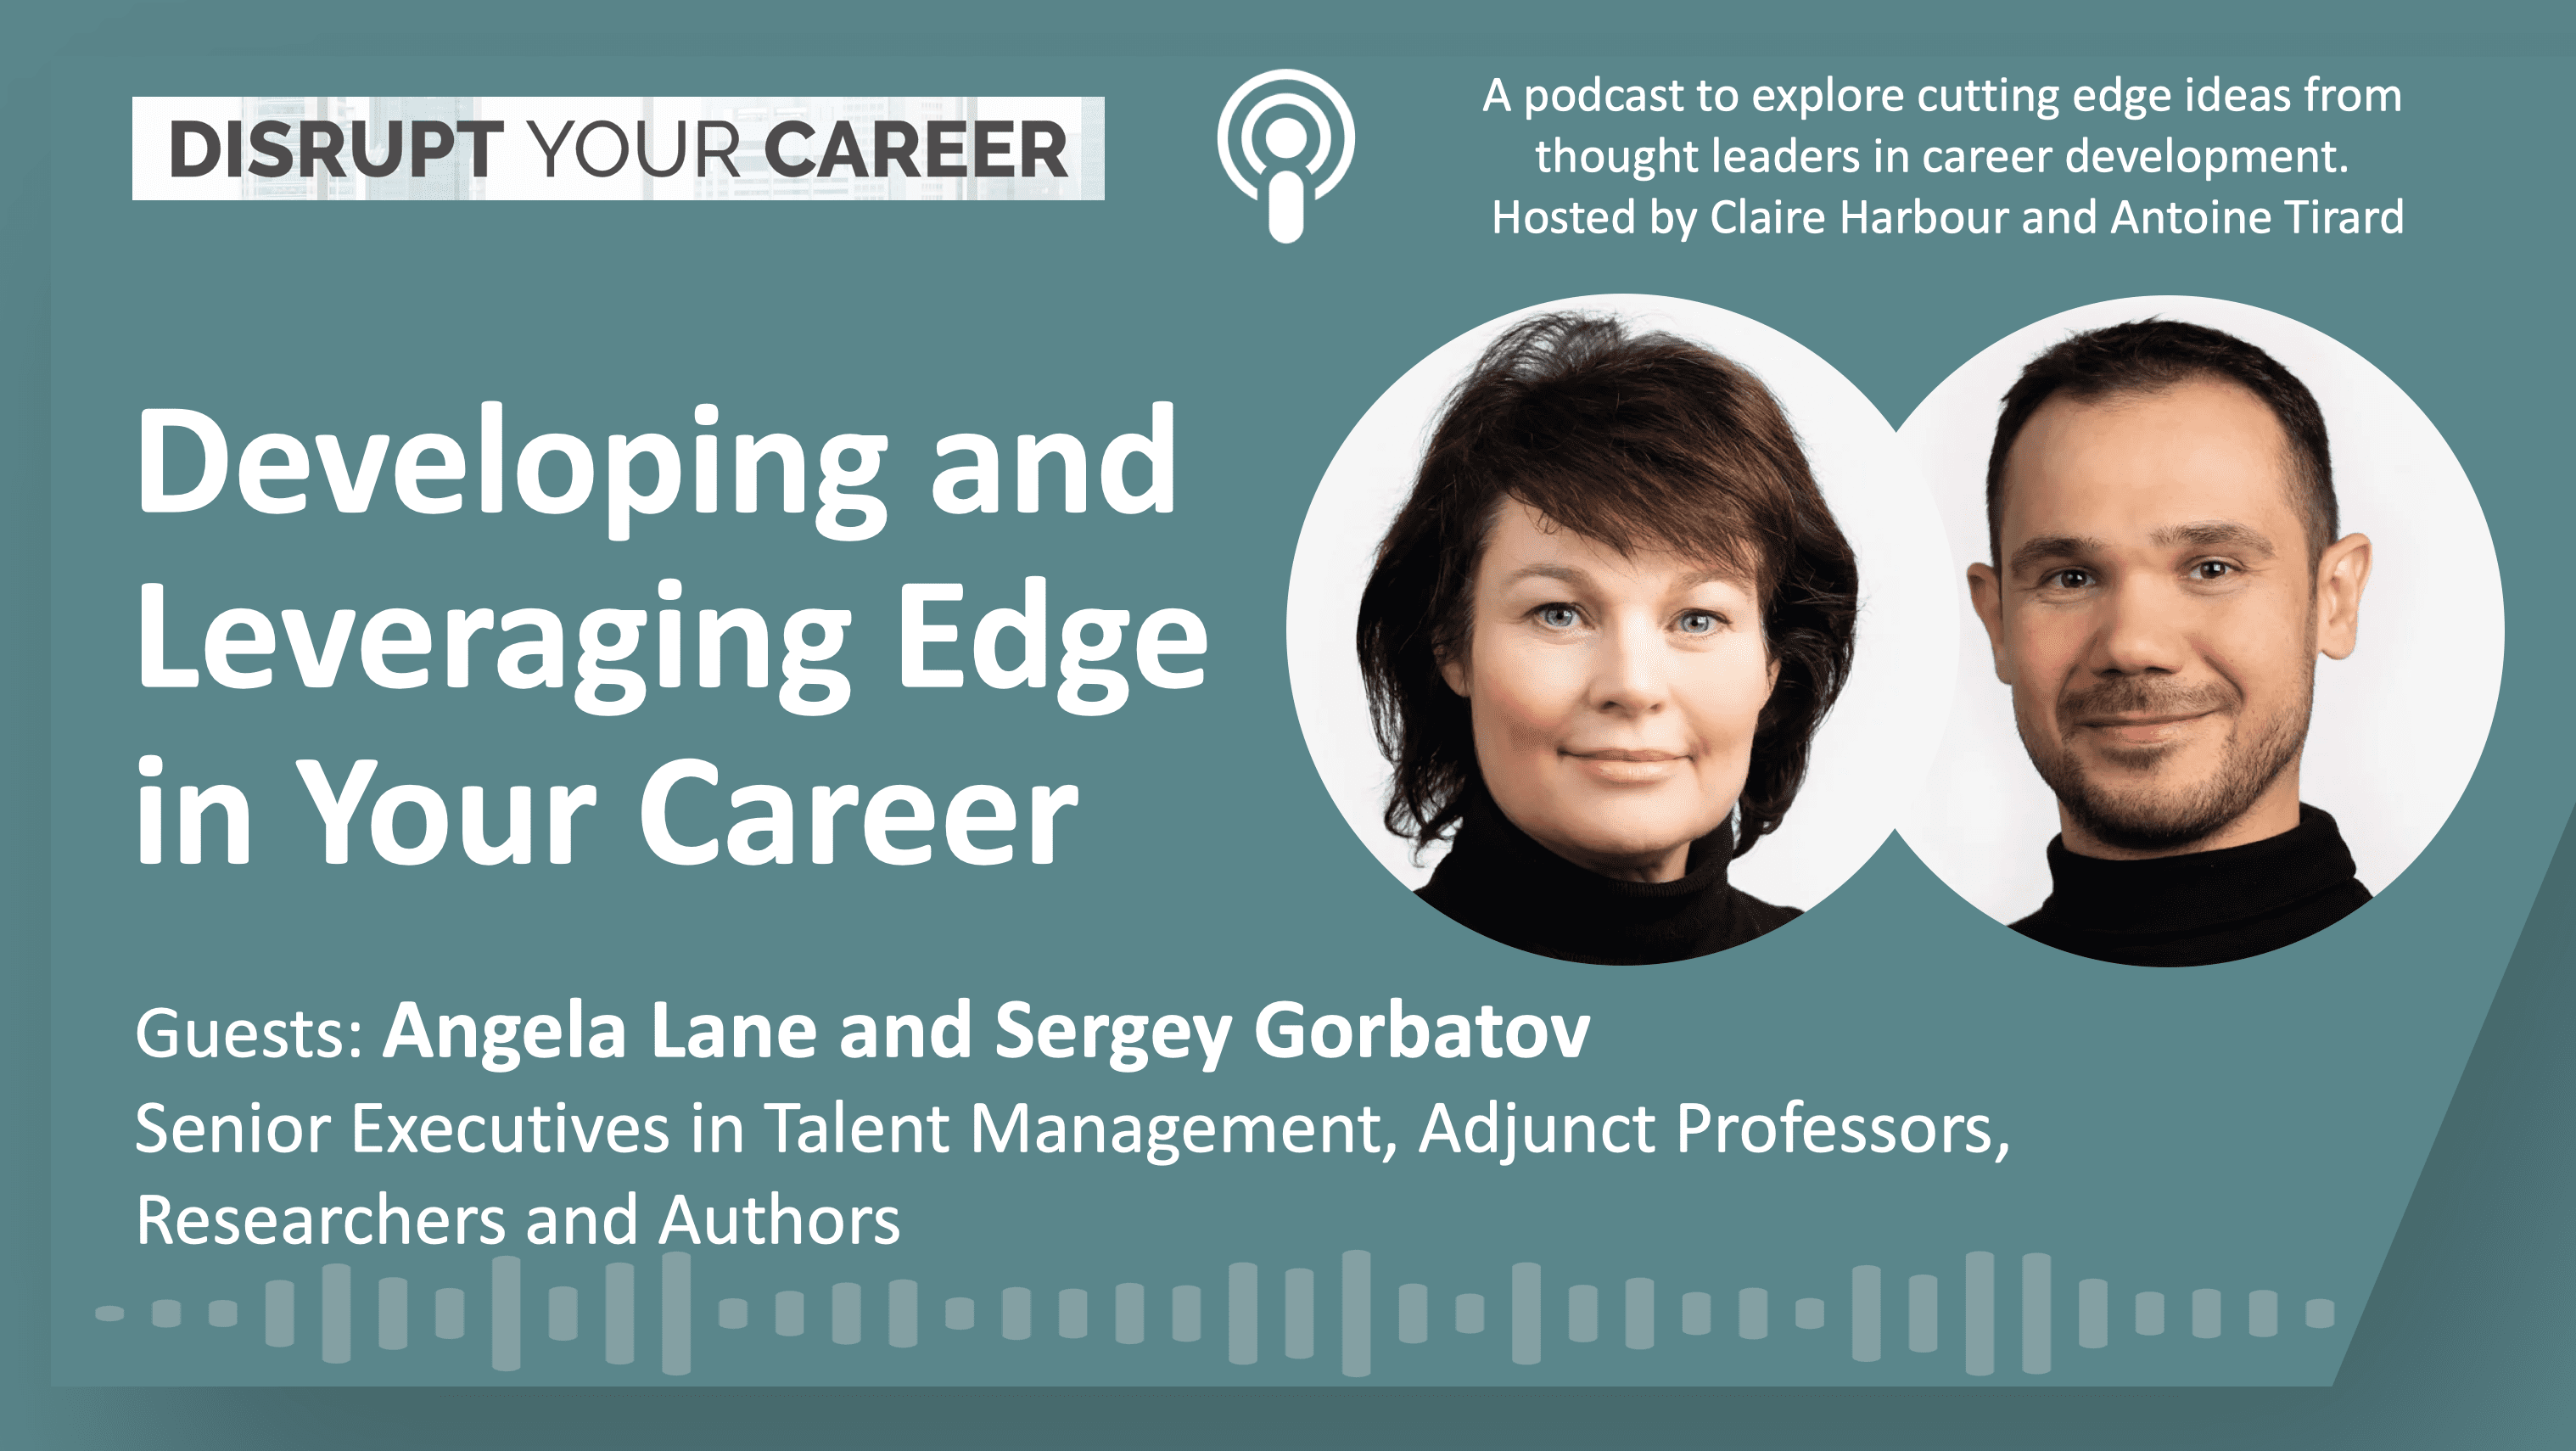 Developing and Leveraging Edge in Your Career